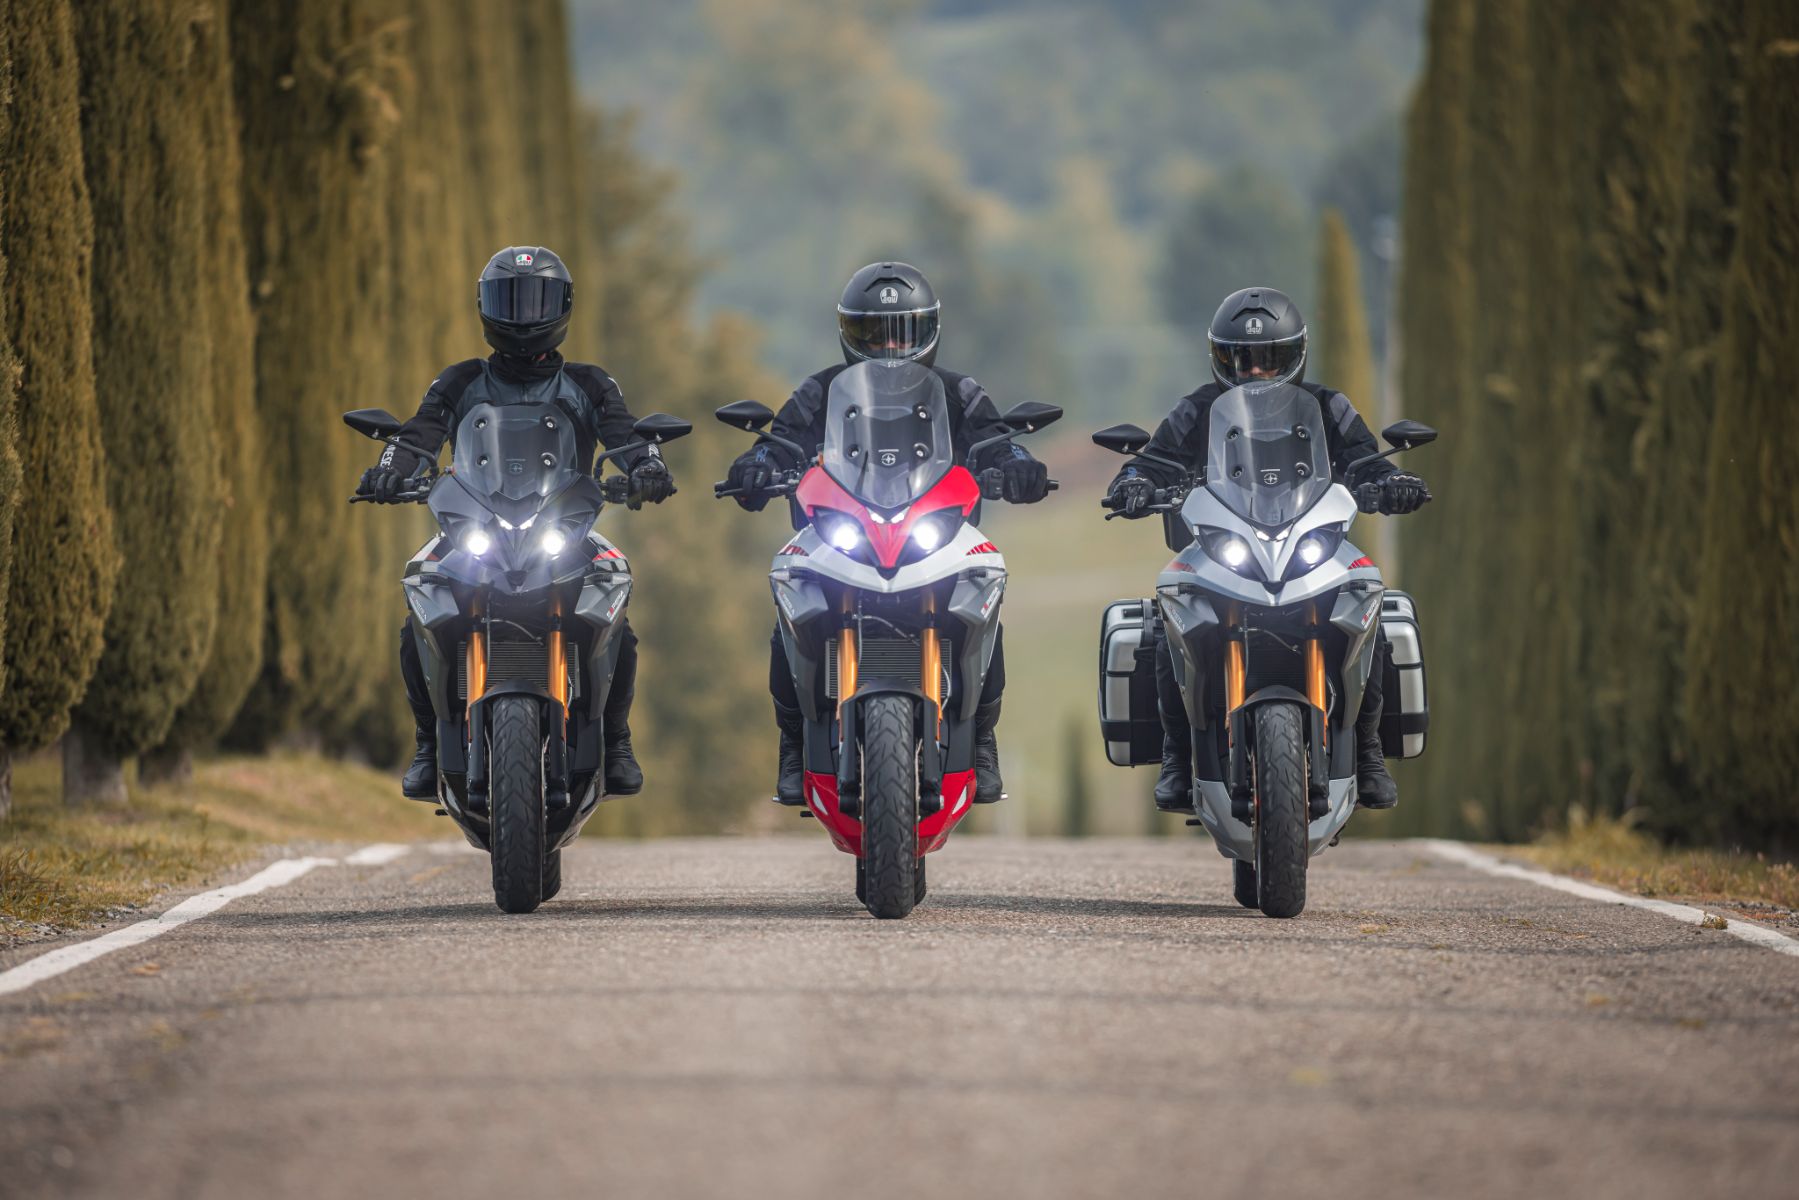 Why are electric motorcycles so expensive?